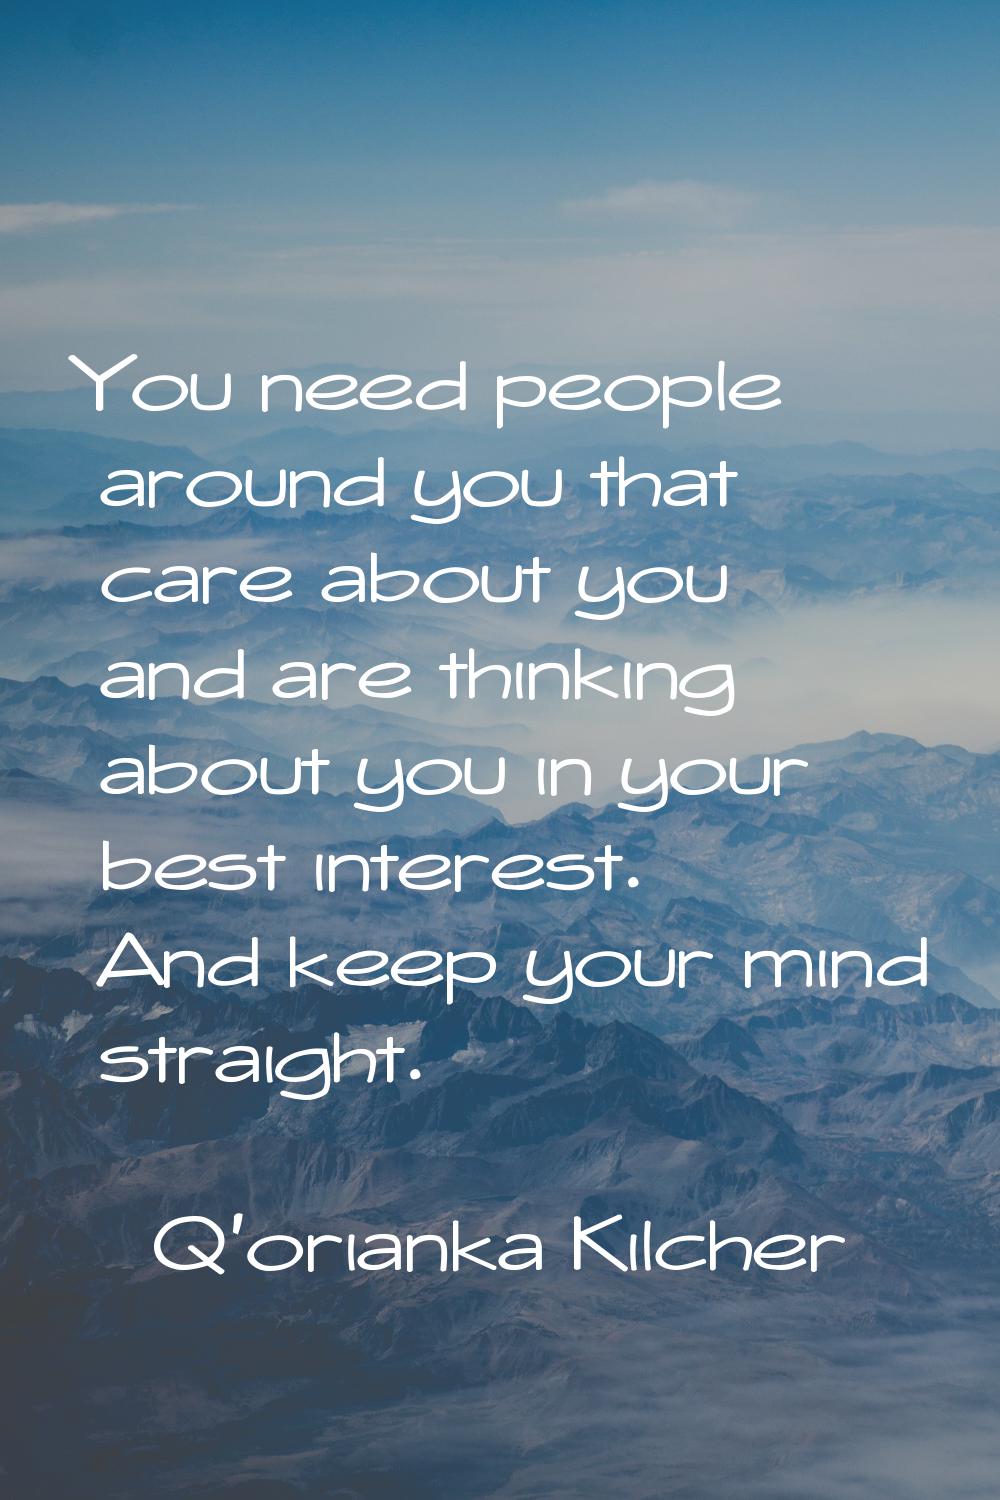 You need people around you that care about you and are thinking about you in your best interest. An